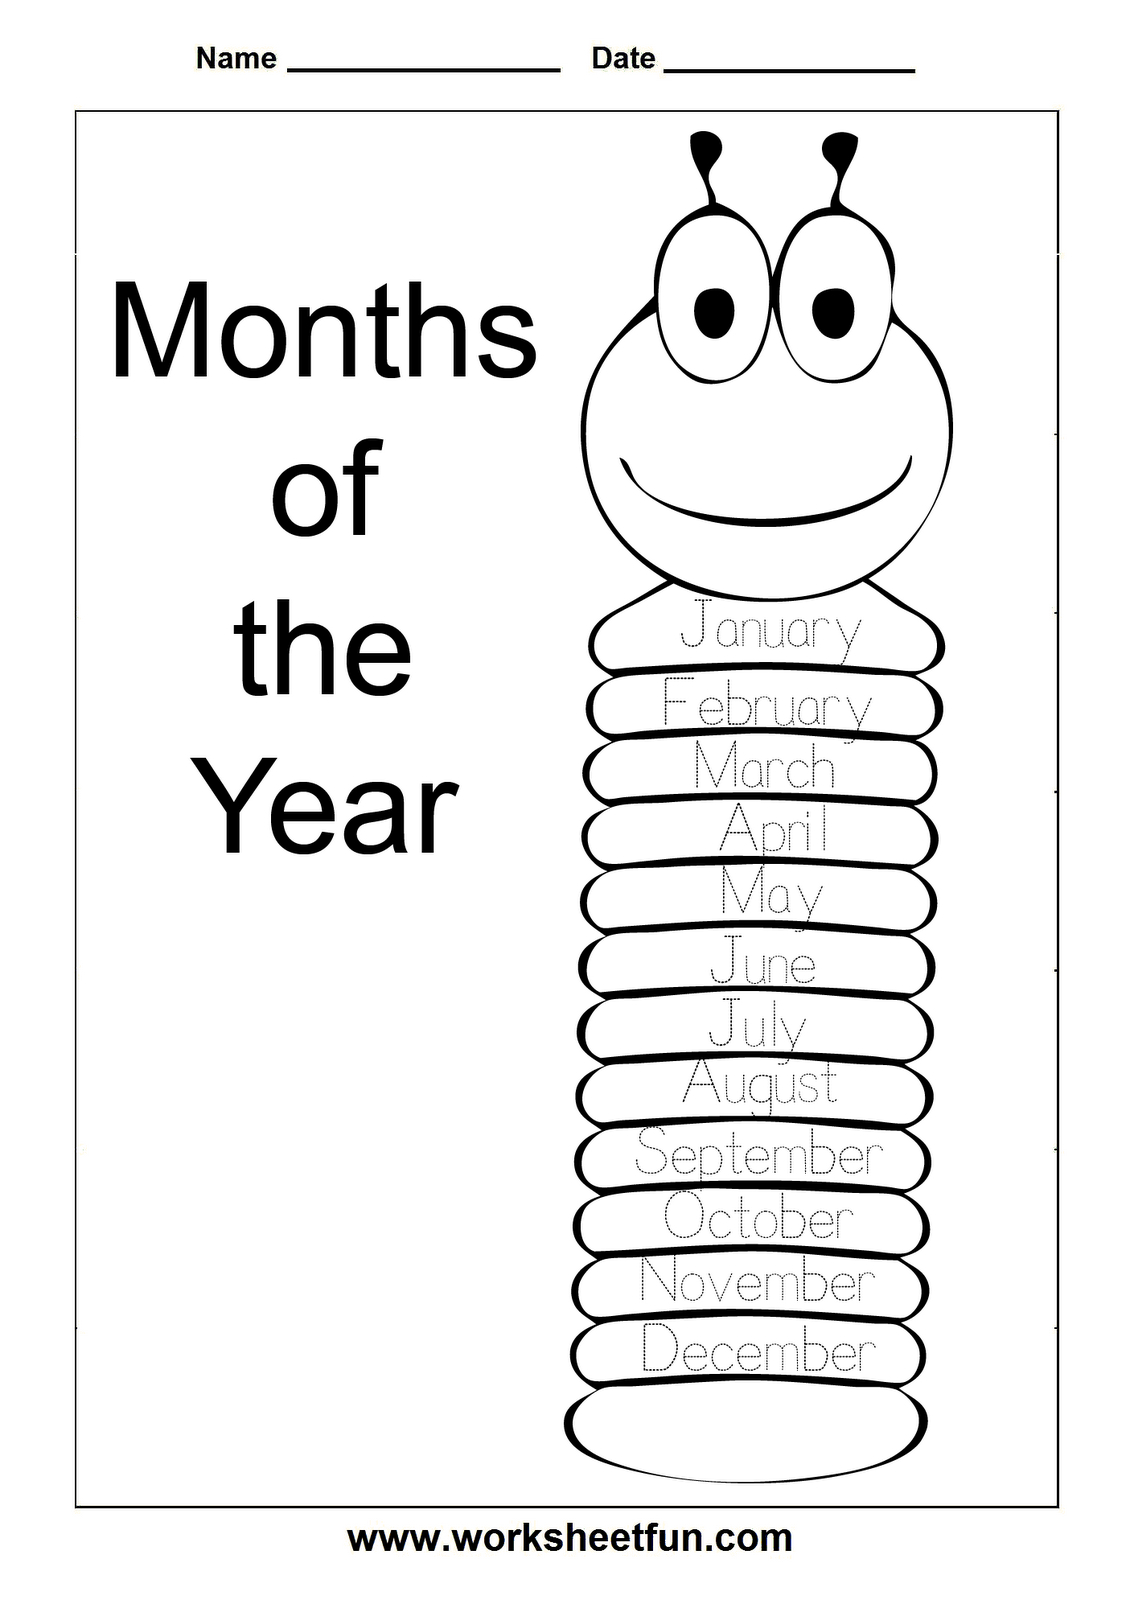 Image Result For How To Teach Months Of The Year | Kiddo | Preschool - Free Printable Months Of The Year Chart